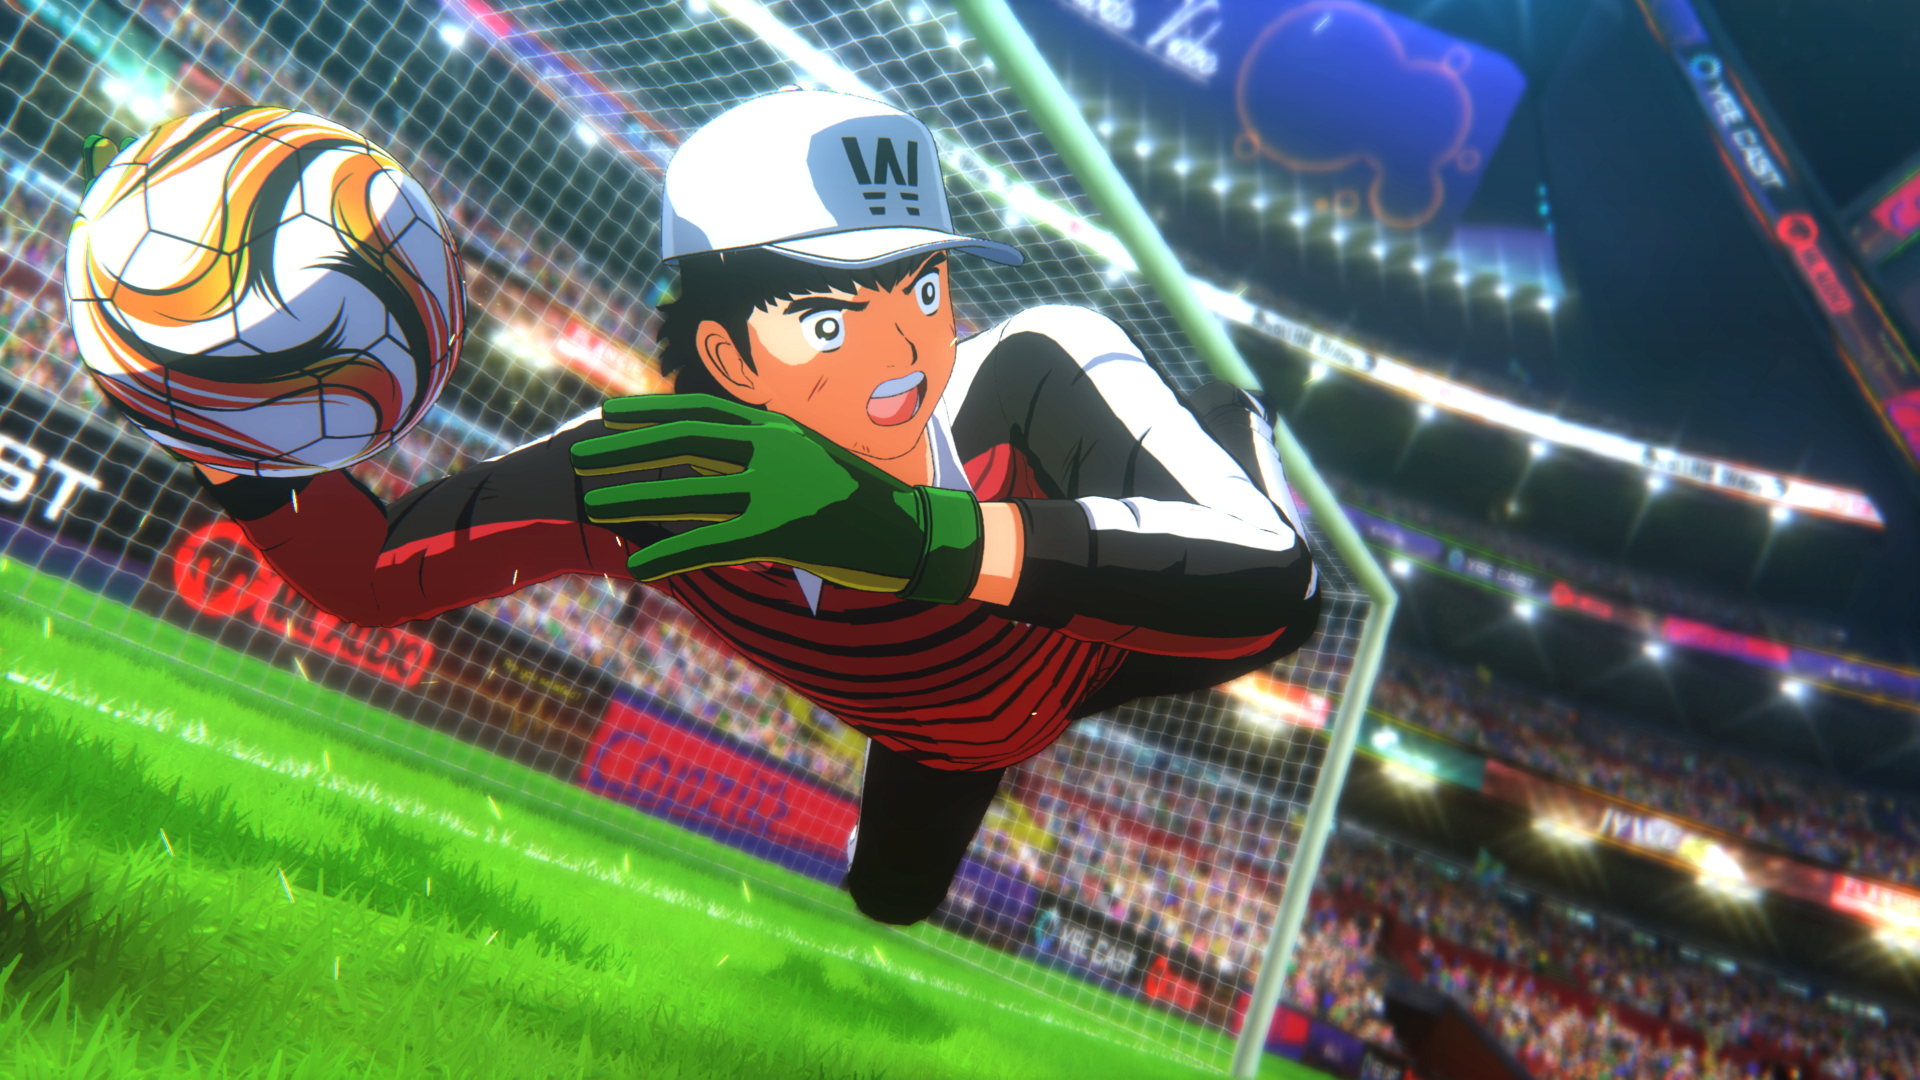 Captain Tsubasa: Rise of New Champions is now available to pre